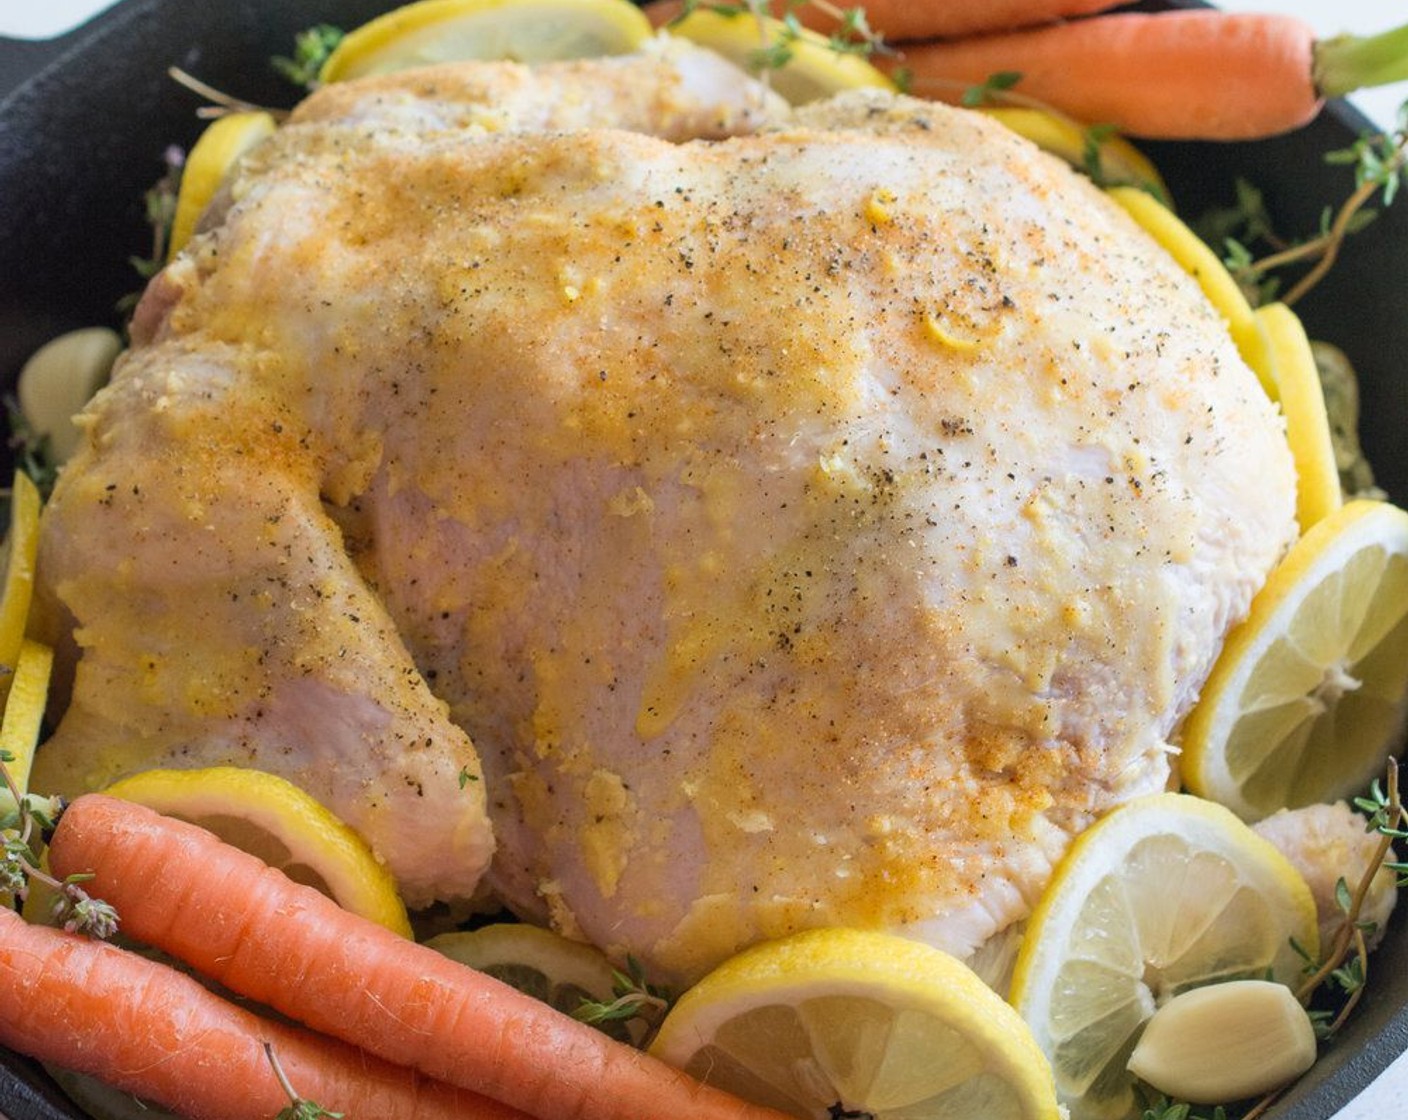 step 7 Slice the other Lemon (1) into thin slices. Place lemon slices around the chicken, then place Carrots (4), Garlic (10 cloves) and Fresh Thyme (6 sprigs) all around the chicken.